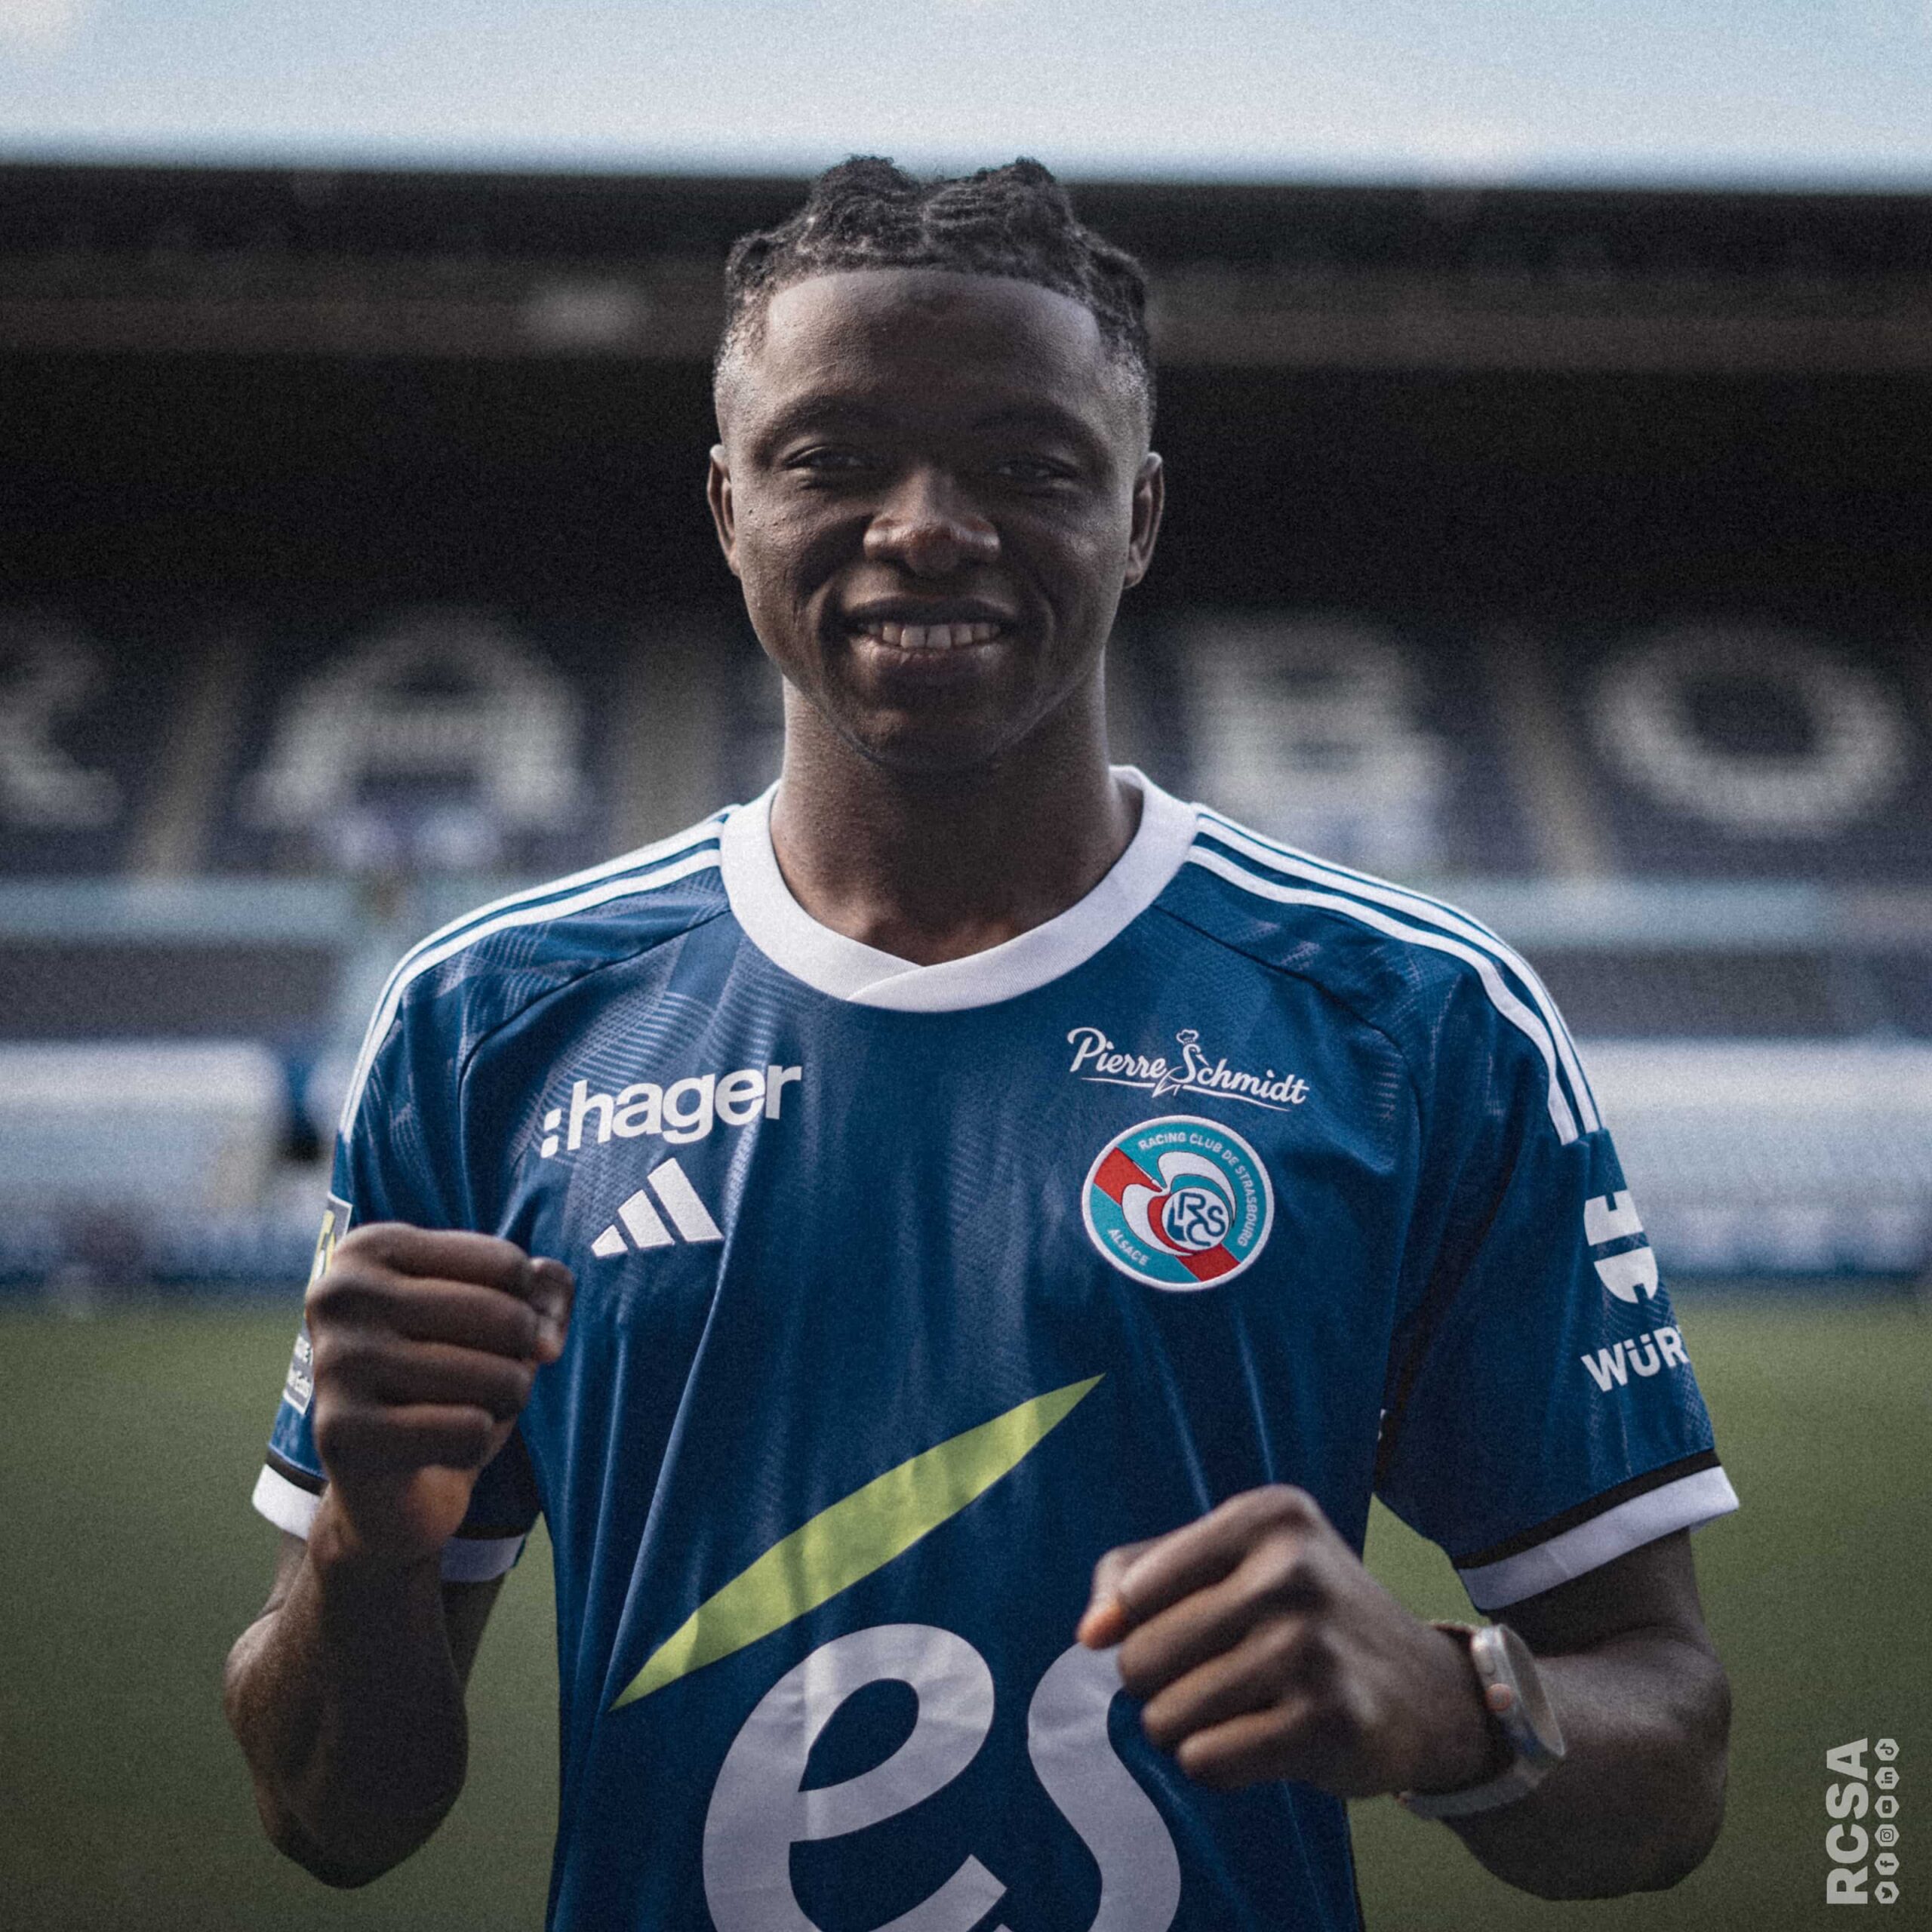 Racing Club de Strasbourg Alsace English on X: From 🇨🇮 to 🇫🇷  𝐖𝐞𝐥𝐜𝐨𝐦𝐞 𝐀𝐛𝐚𝐤𝐚𝐫 𝐒𝐲𝐥𝐥𝐚 — the Côte d'Ivoire international  has joined RCSA on a 5️⃣ year contract until 2028! 🐘 #MercatoRCSA